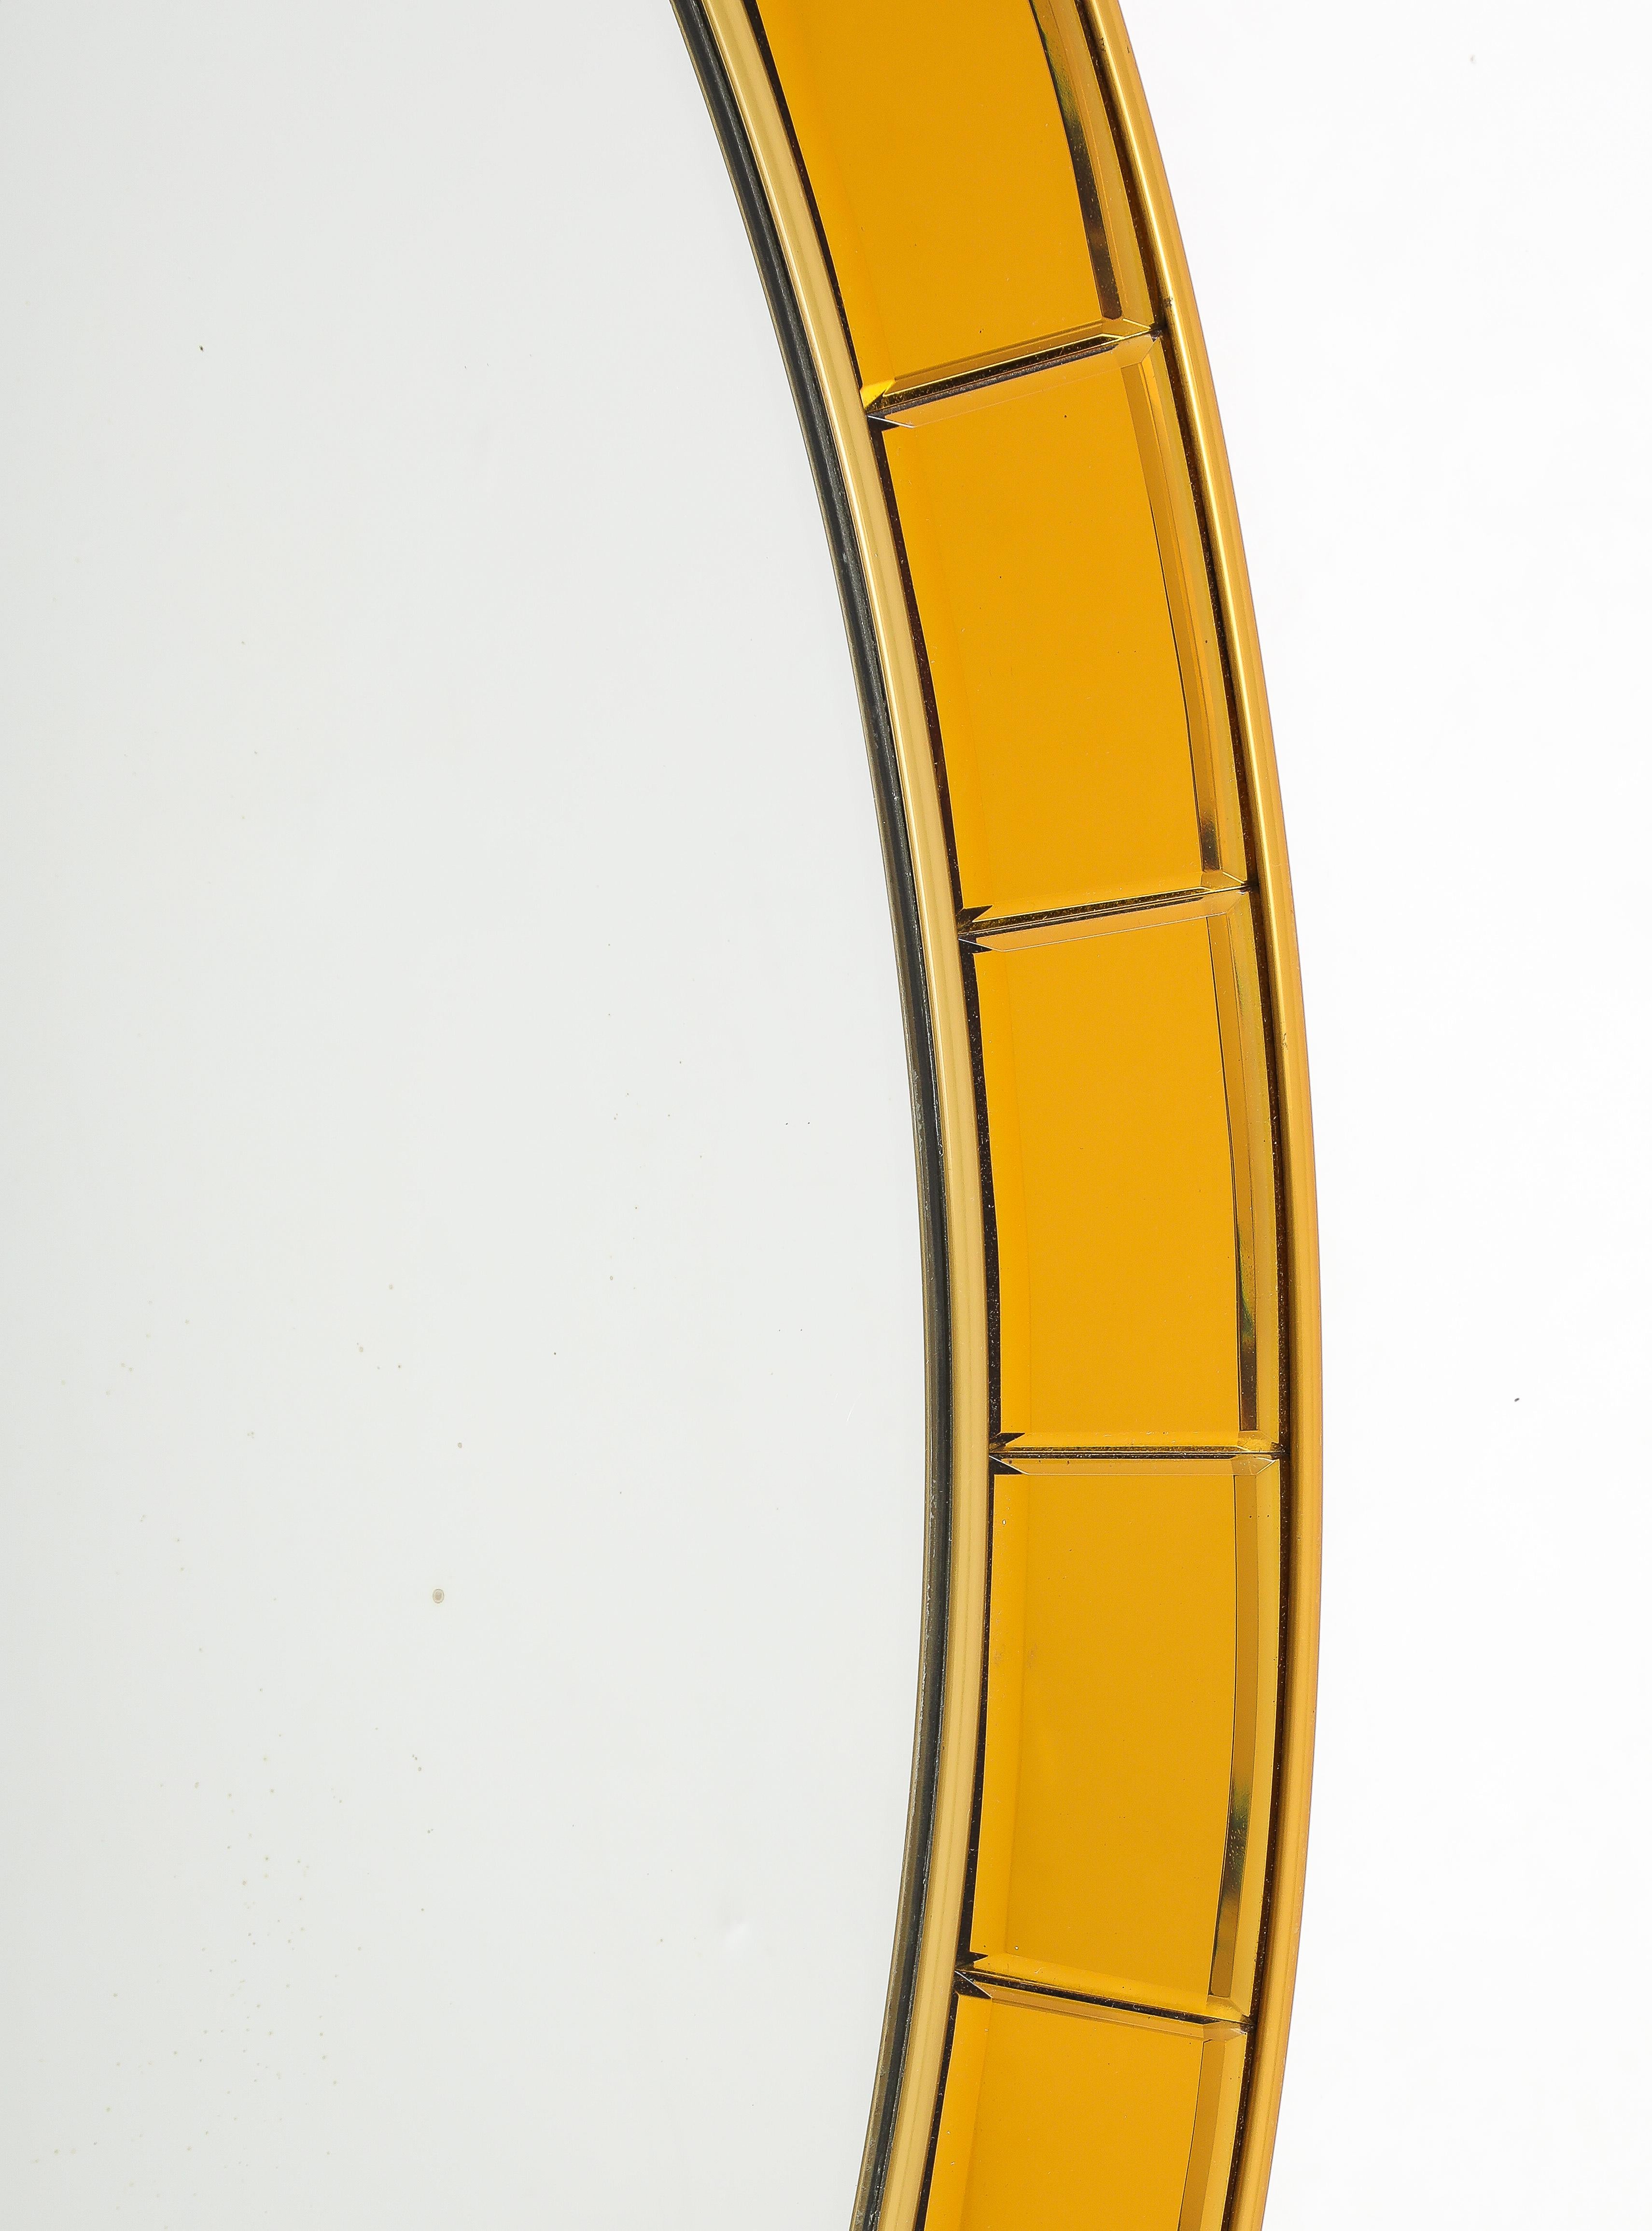 Cristal Art Oval Gold Hand-Cut Beveled Glass Mirror Model 2727, 1950s For Sale 1